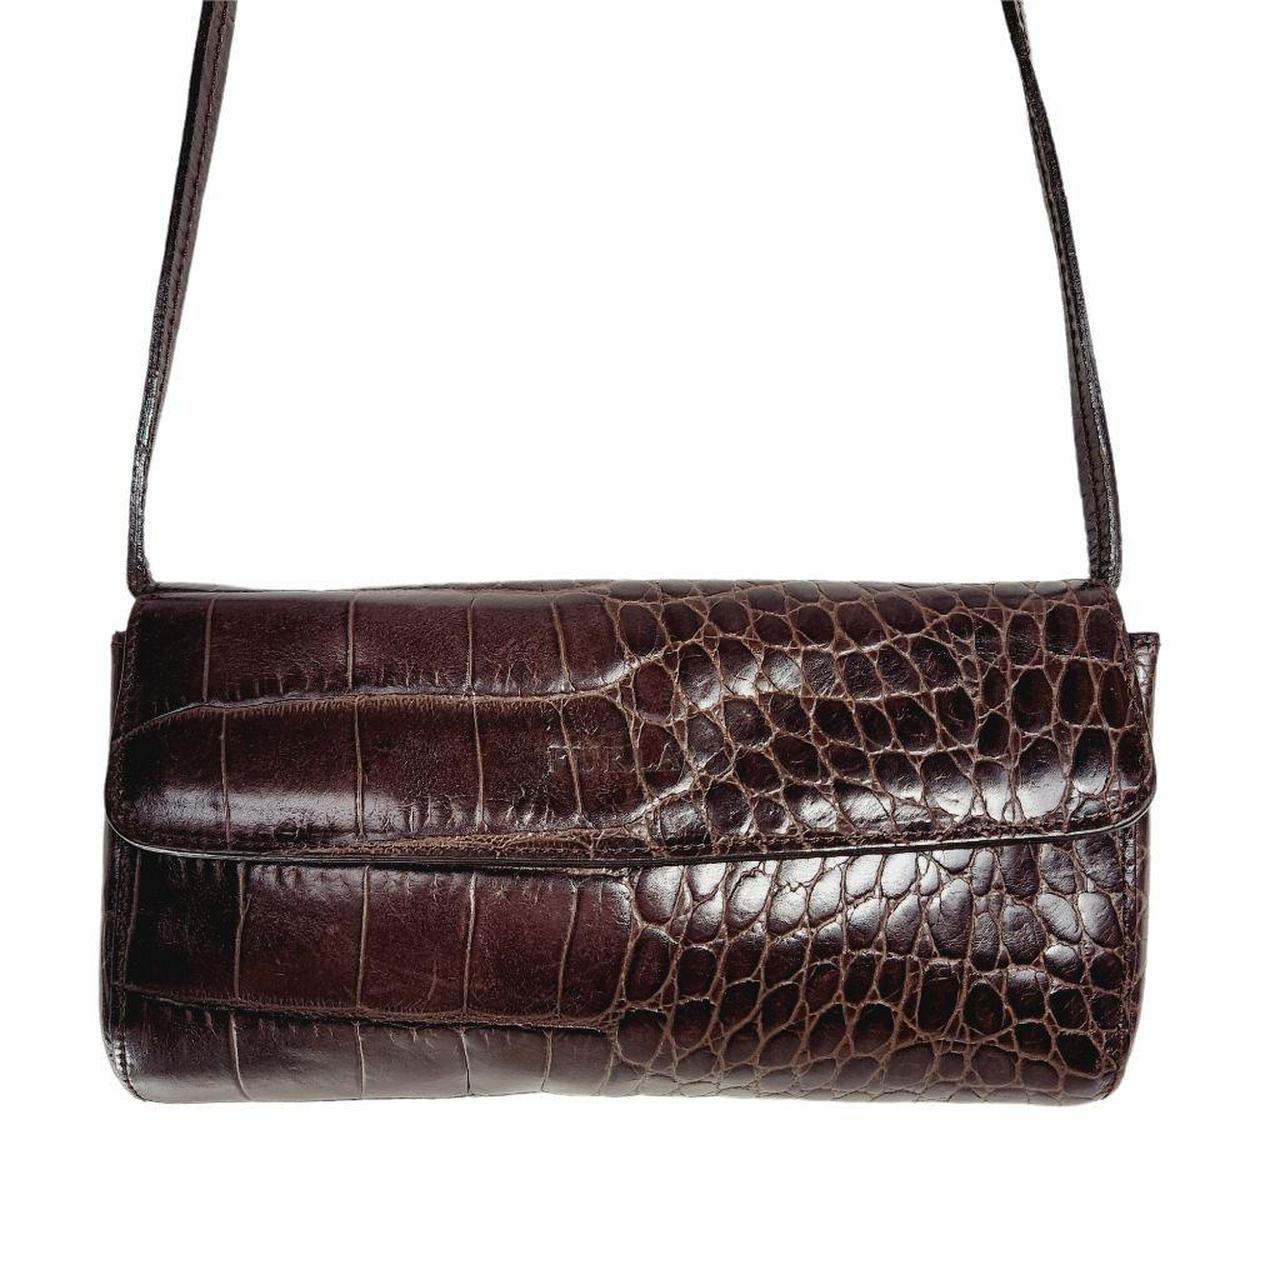 Product Image 1 - Super cute small brown croc